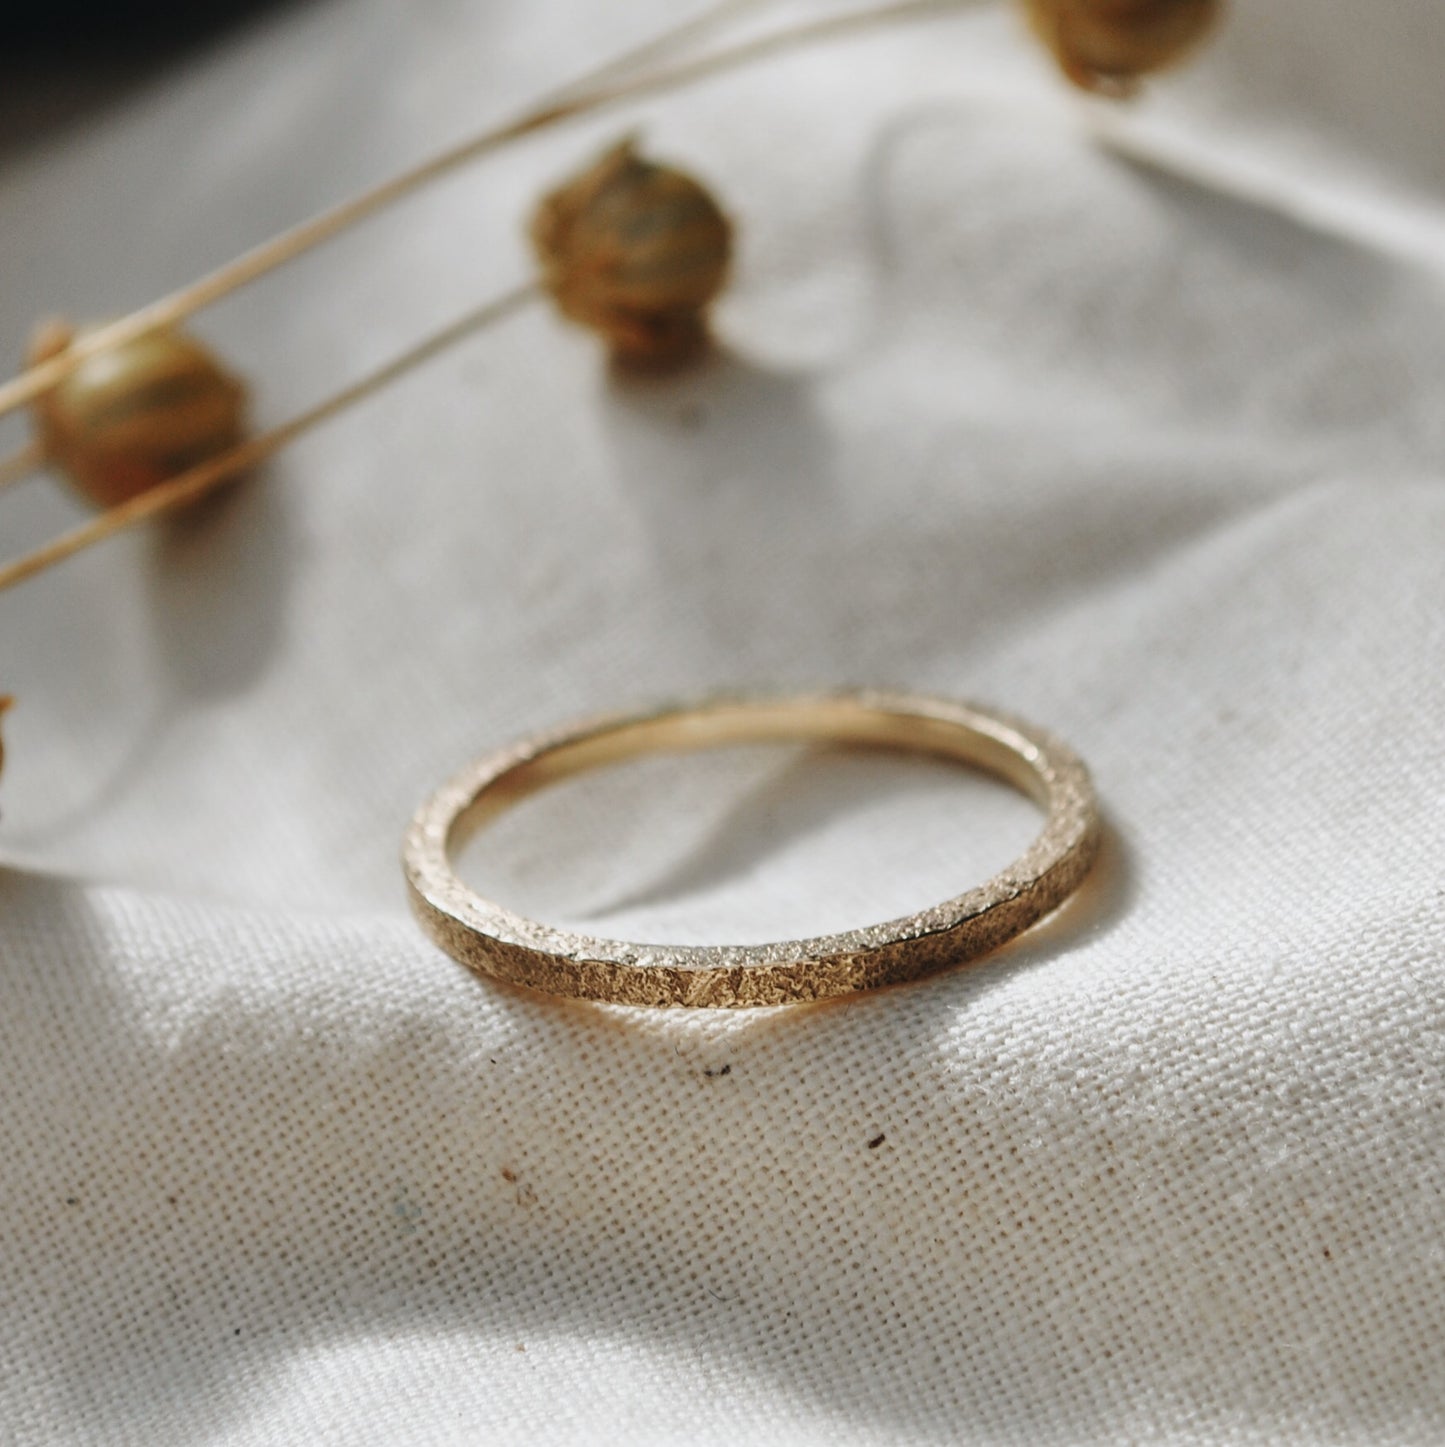 Square section ring, richly textured, laying on sunlit natural linen